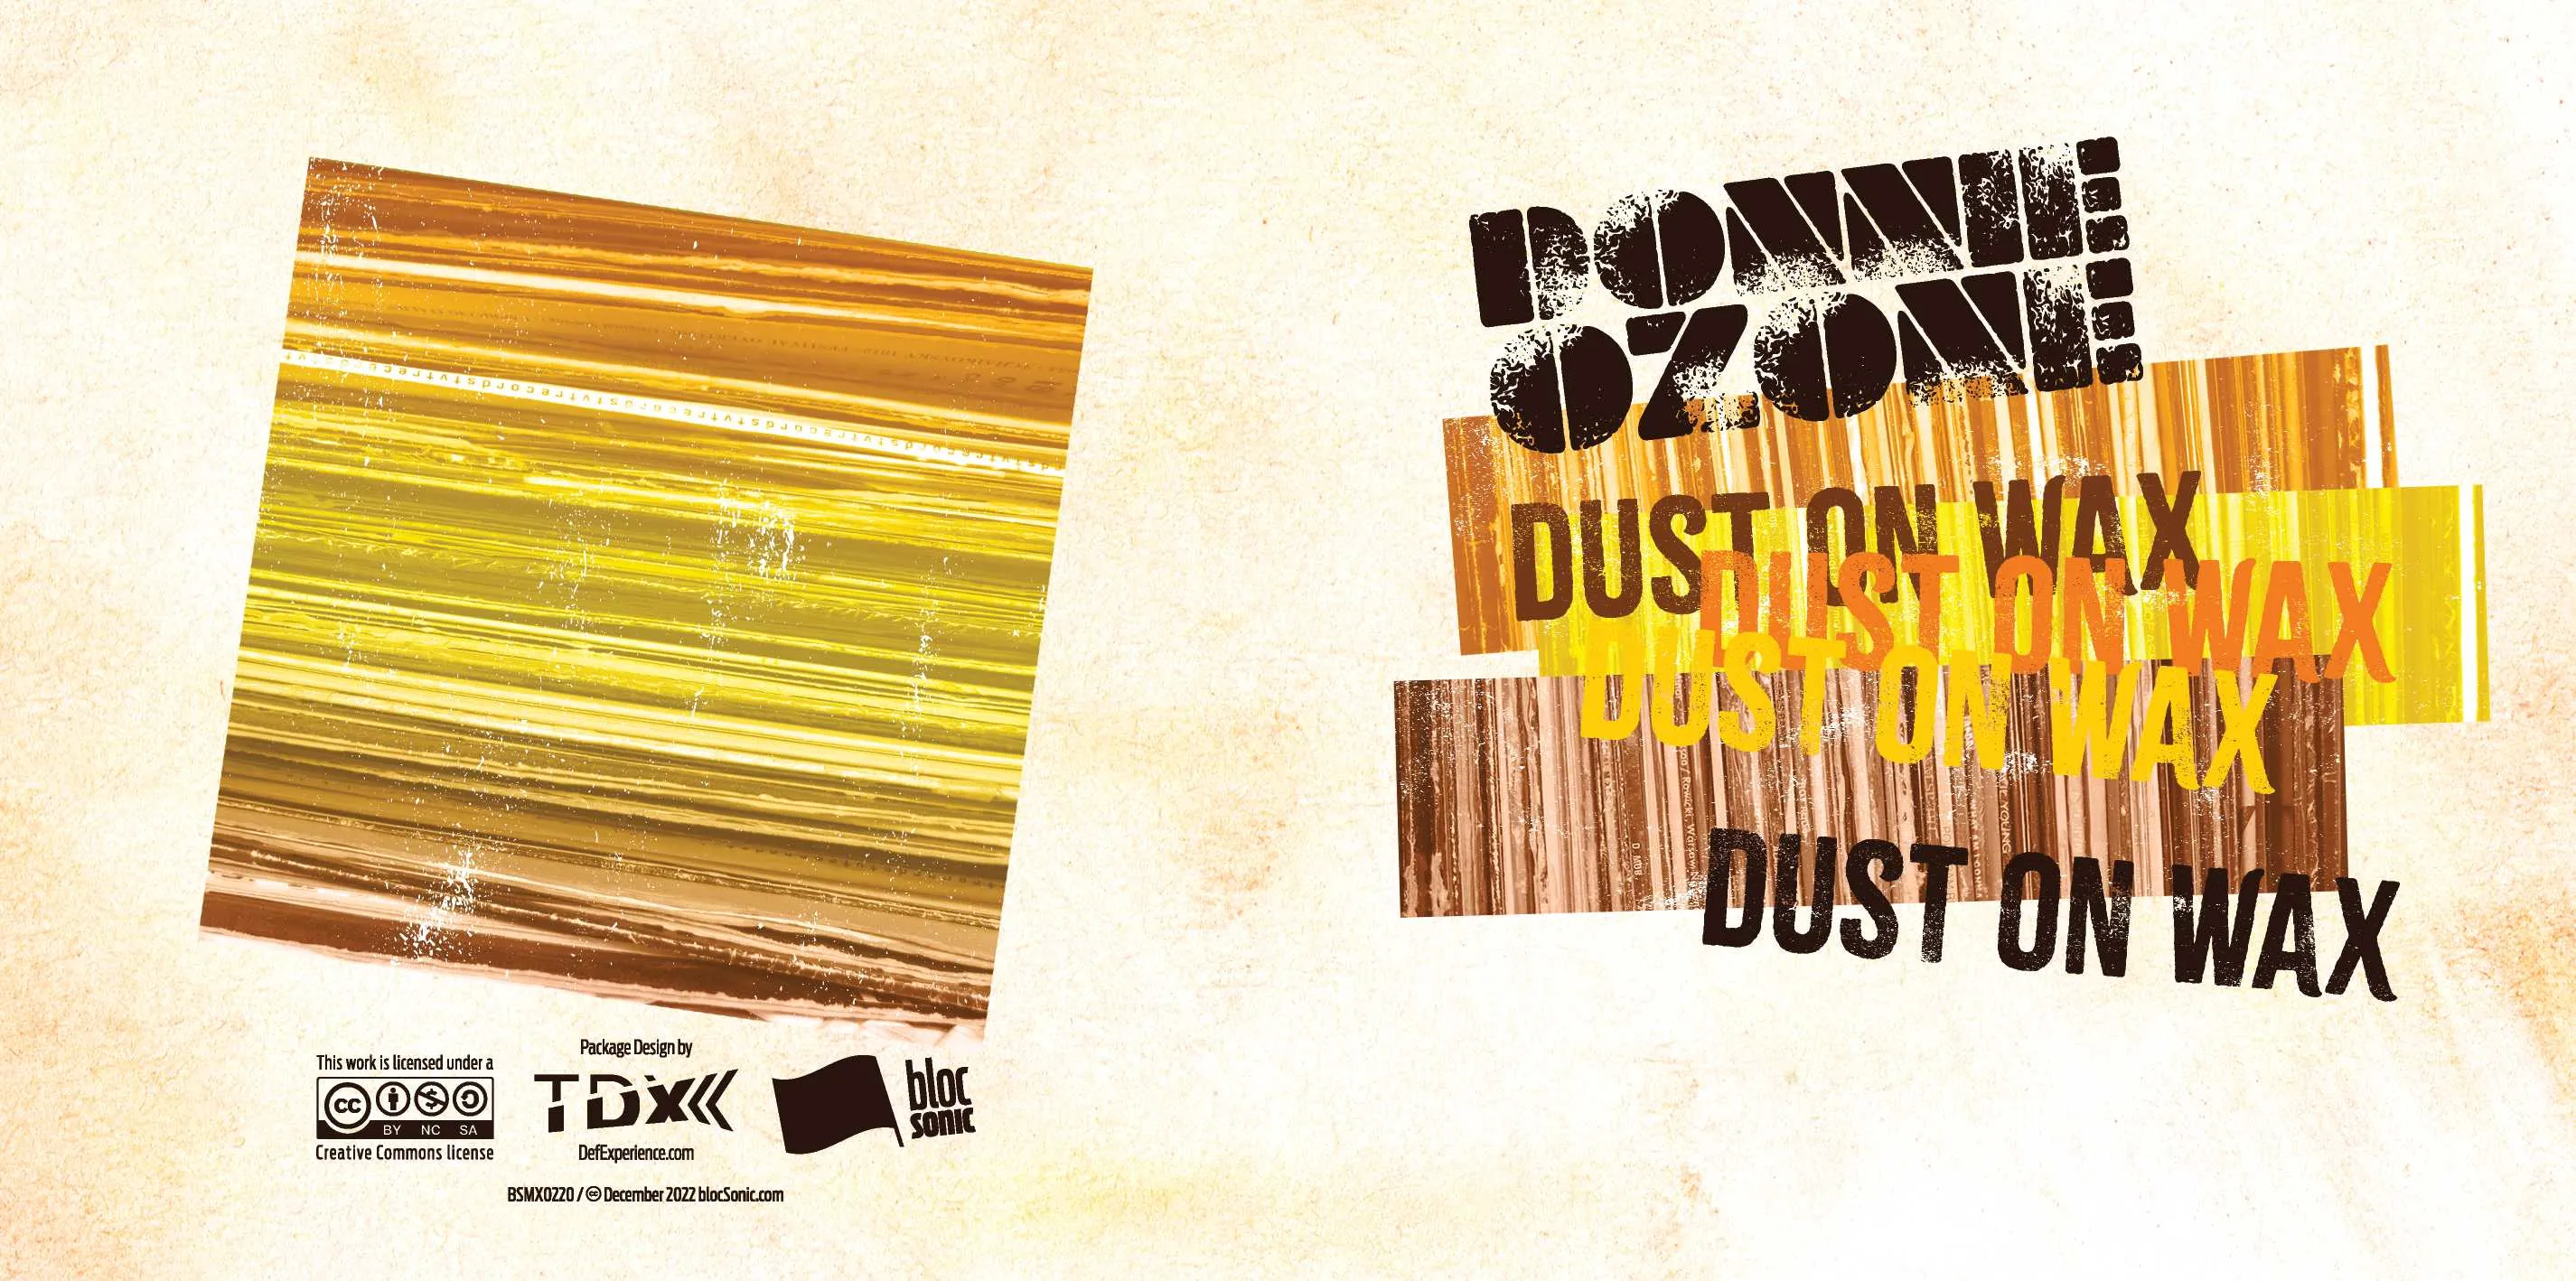 Album insert for “Dust On Wax” by Donnie Ozone